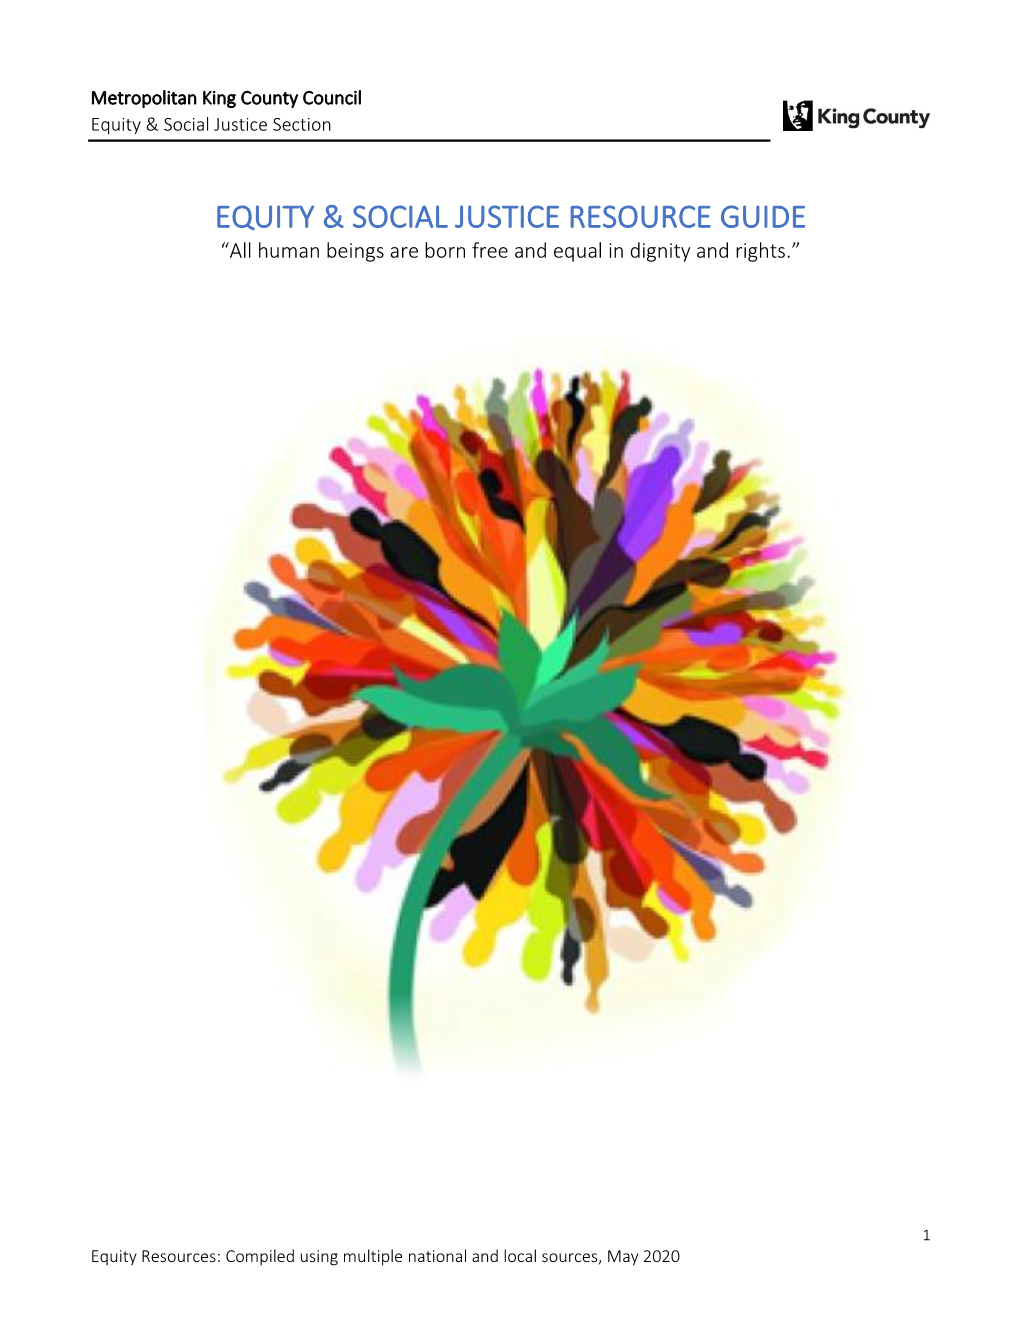 Equity & Social Justice Resource Guide